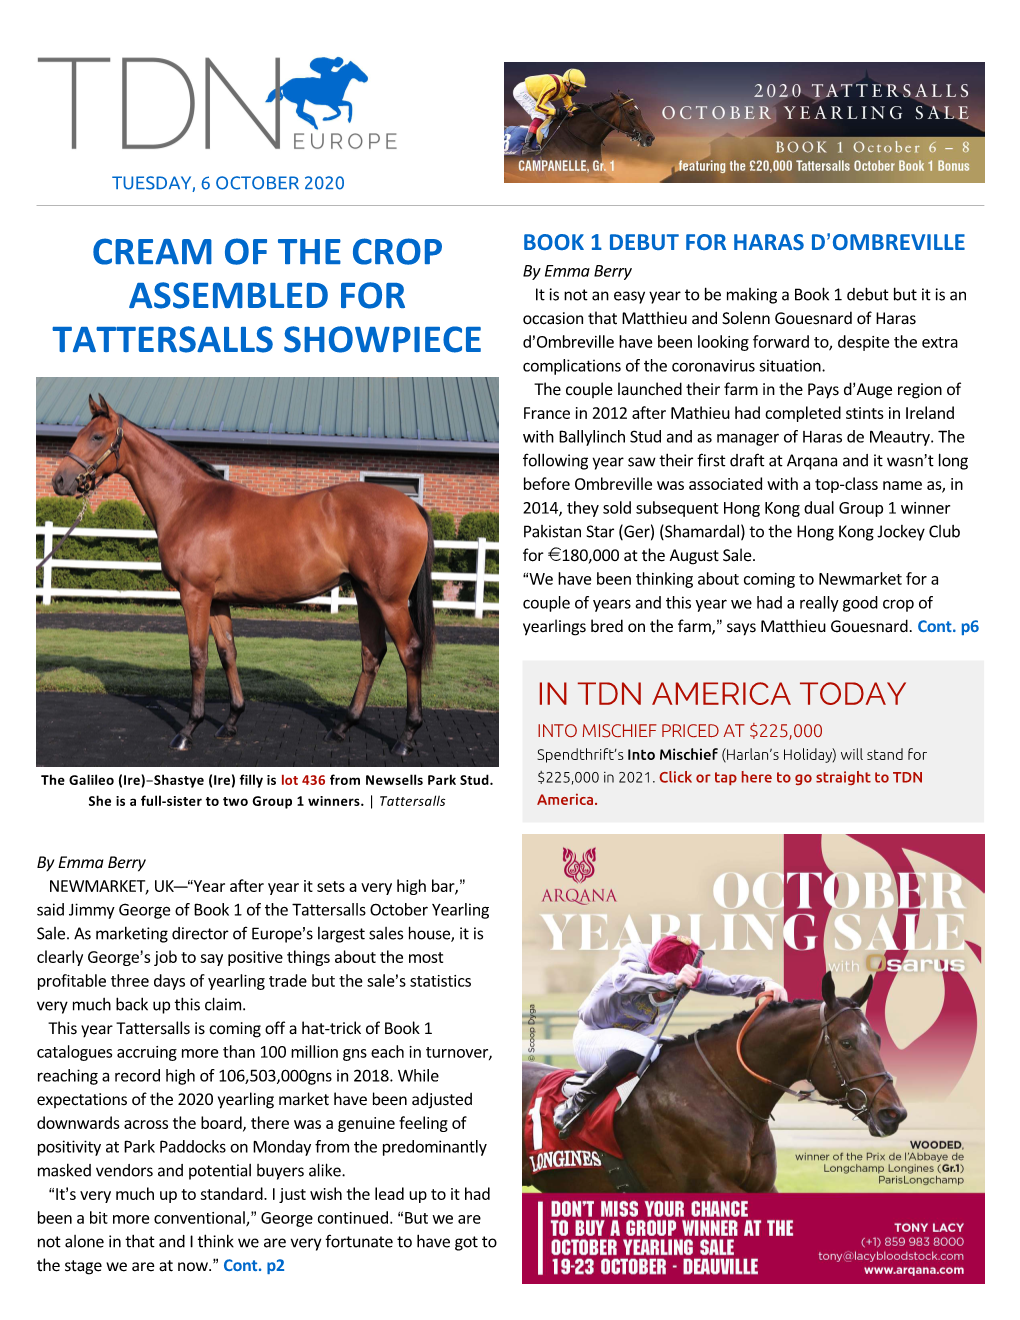 Cream of the Crop Assembled for Tattersalls Showpiece